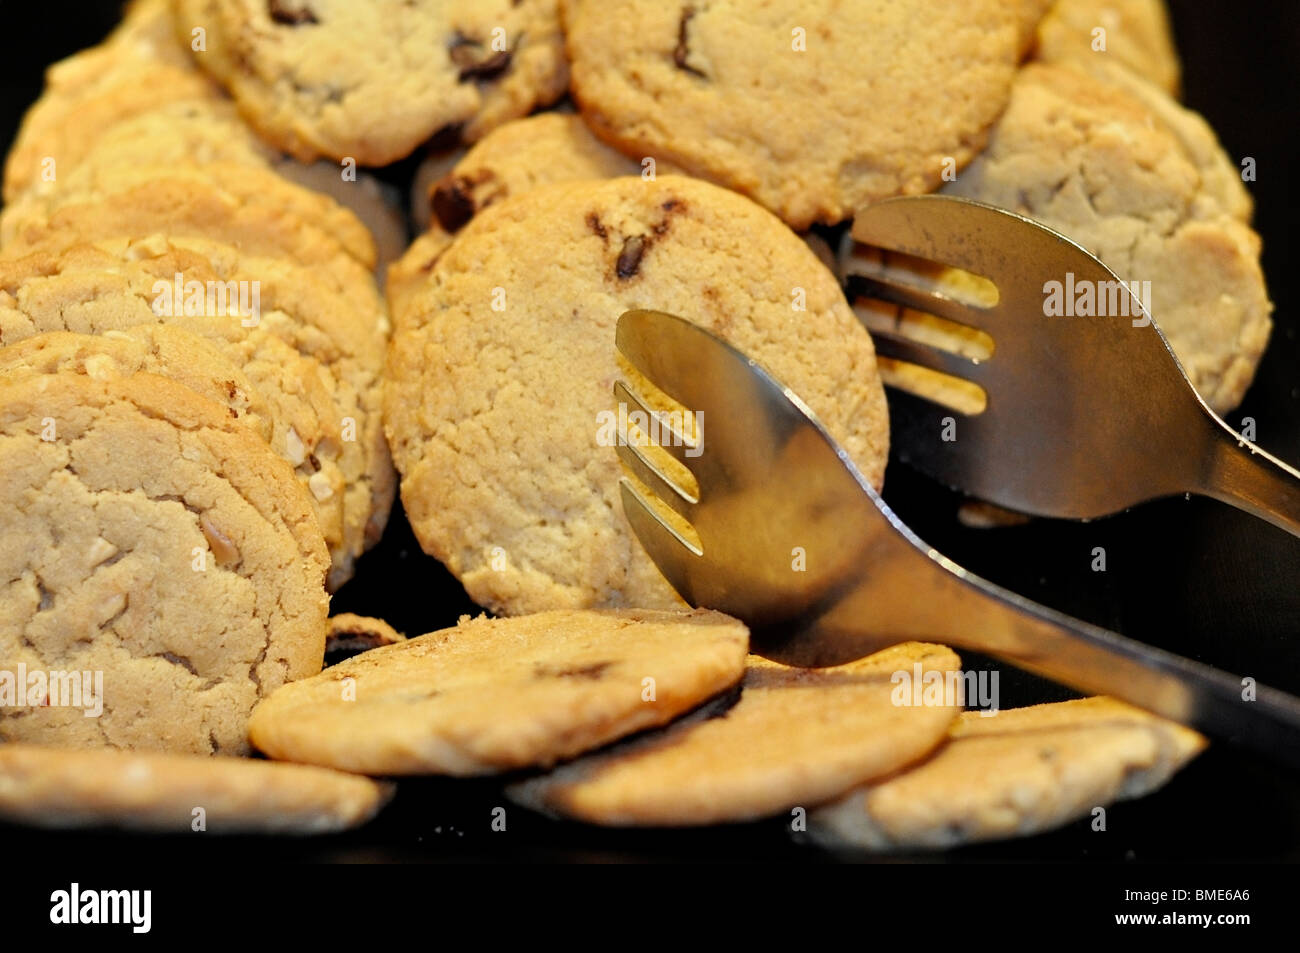 Oatmeal cookies and Chocolate Chip cookies Stock Photo